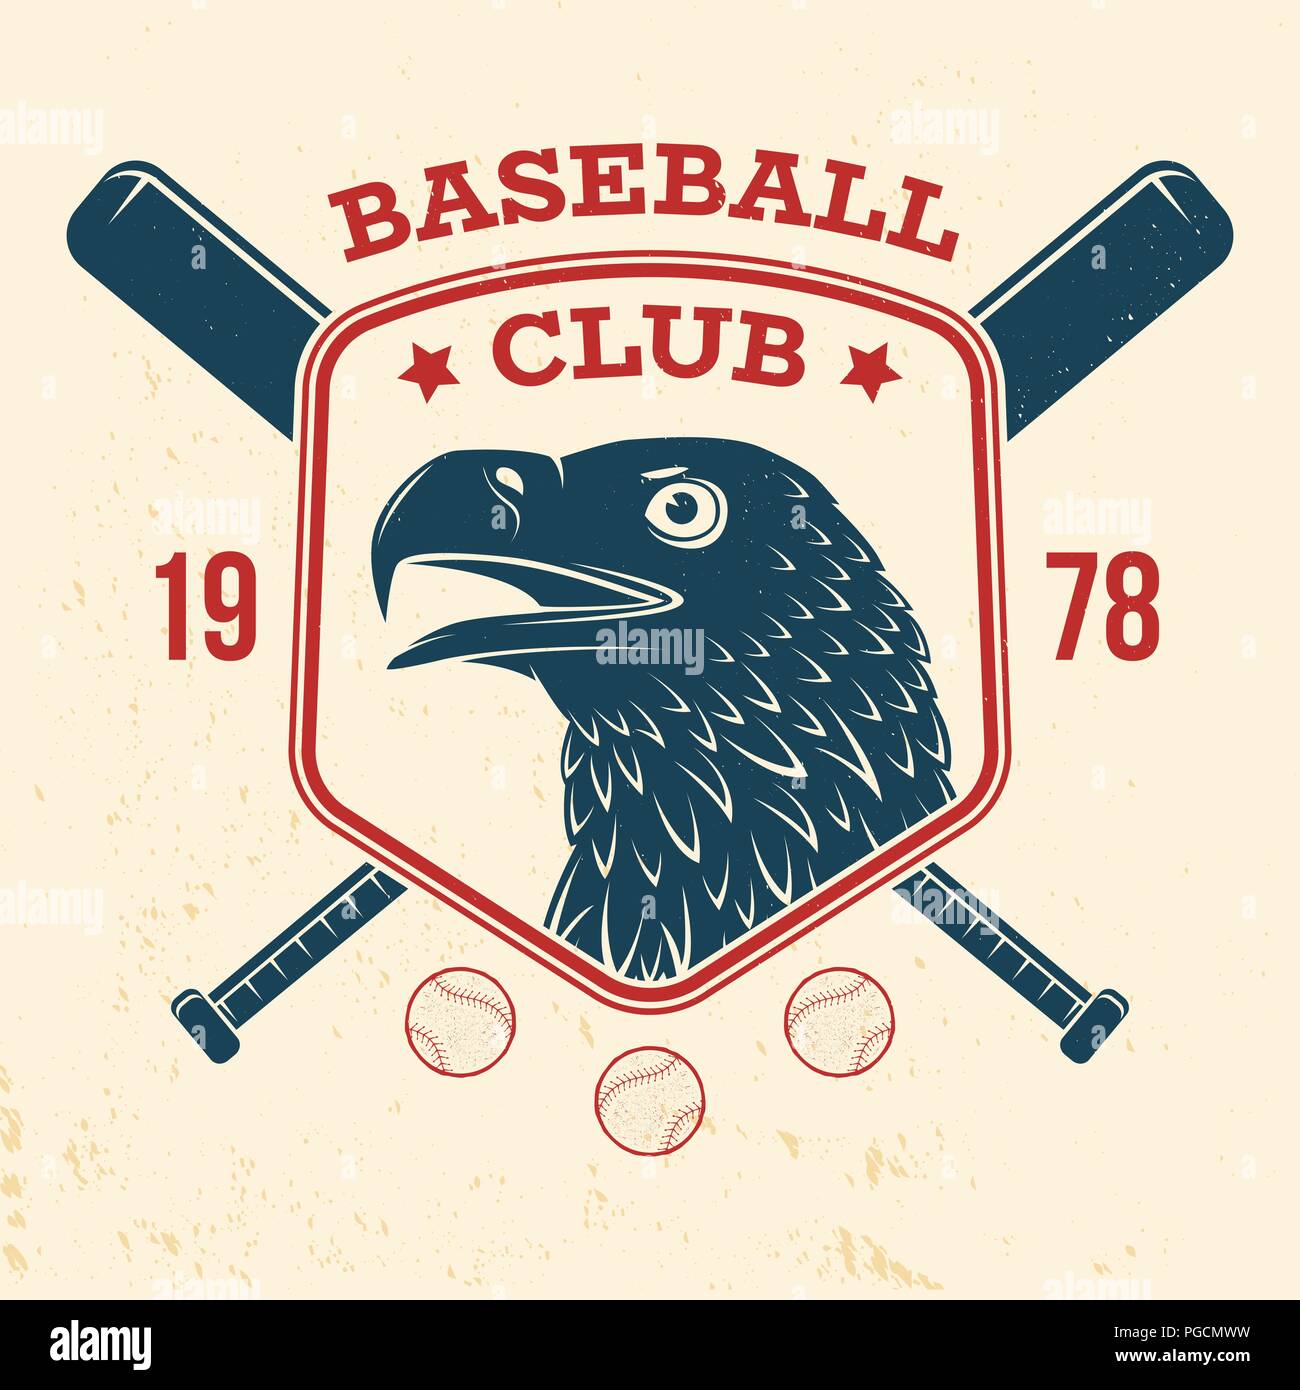 Baseball club badge. Vector illustration. Concept for shirt or logo, print, stamp or tee. Vintage typography design with baseball bats, eagle and ball for baseball silhouette. Stock Vector